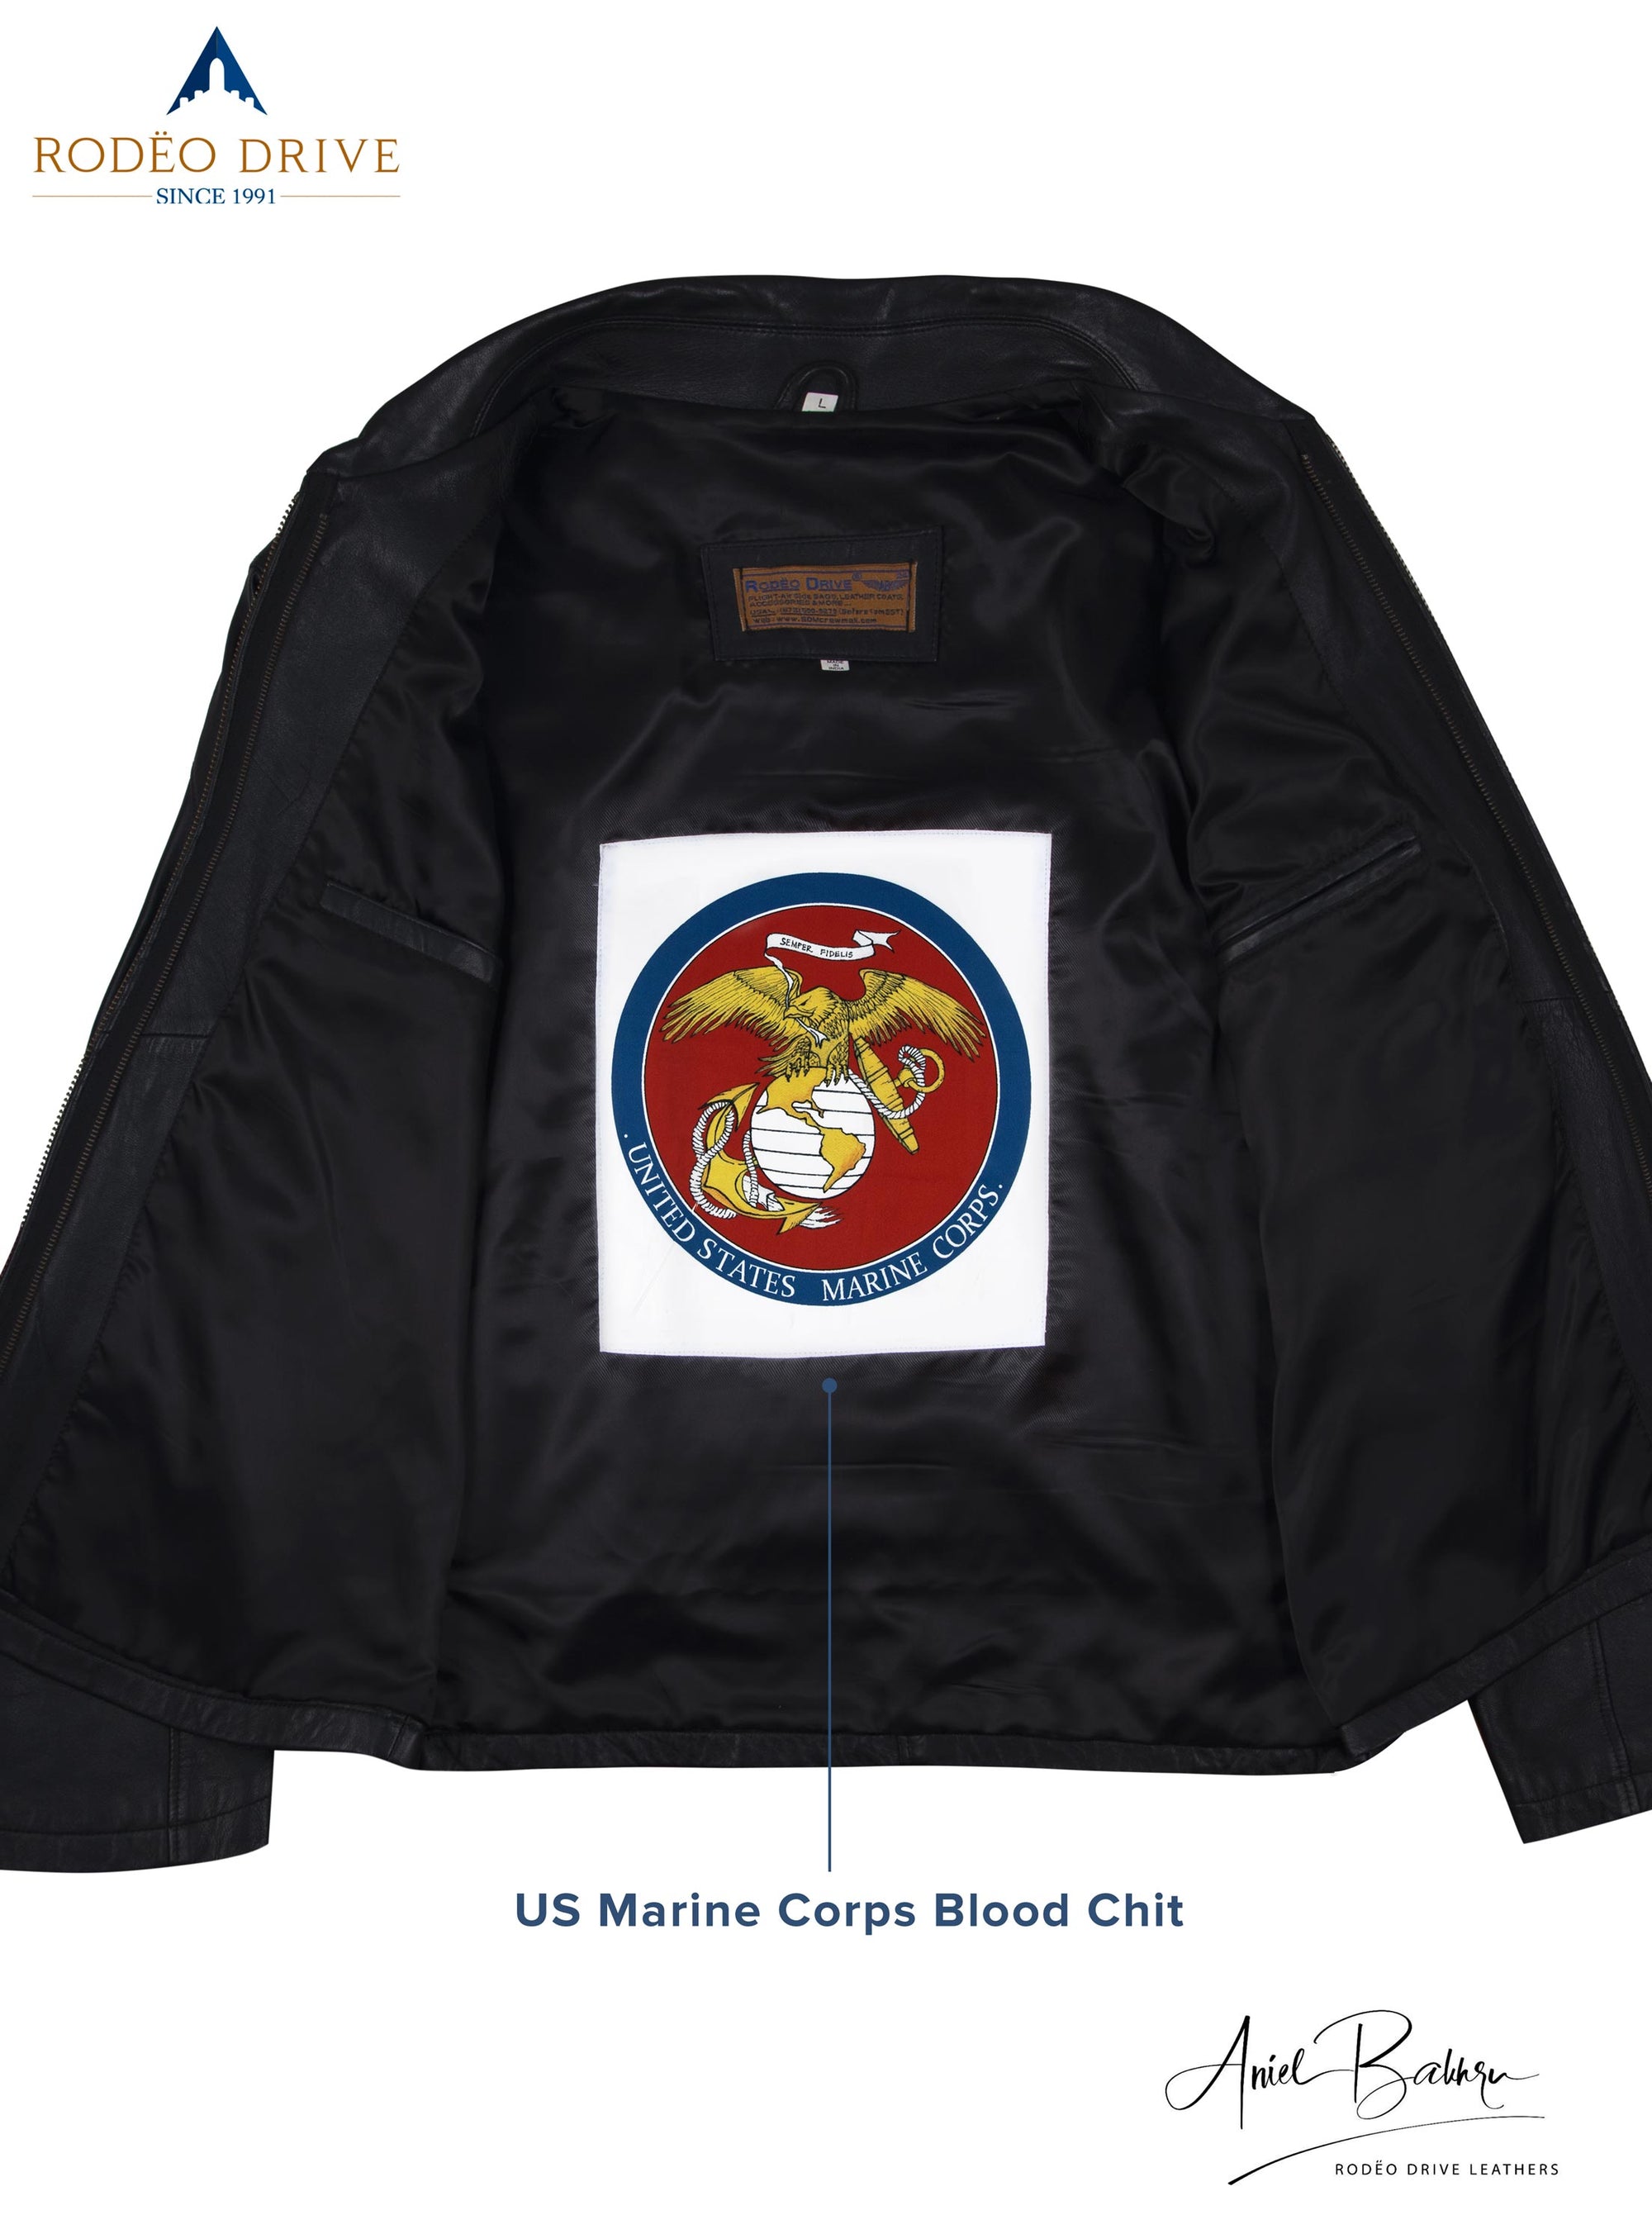 inside image of black leather jacket. A US marine corps Blood chit is sewed inside it